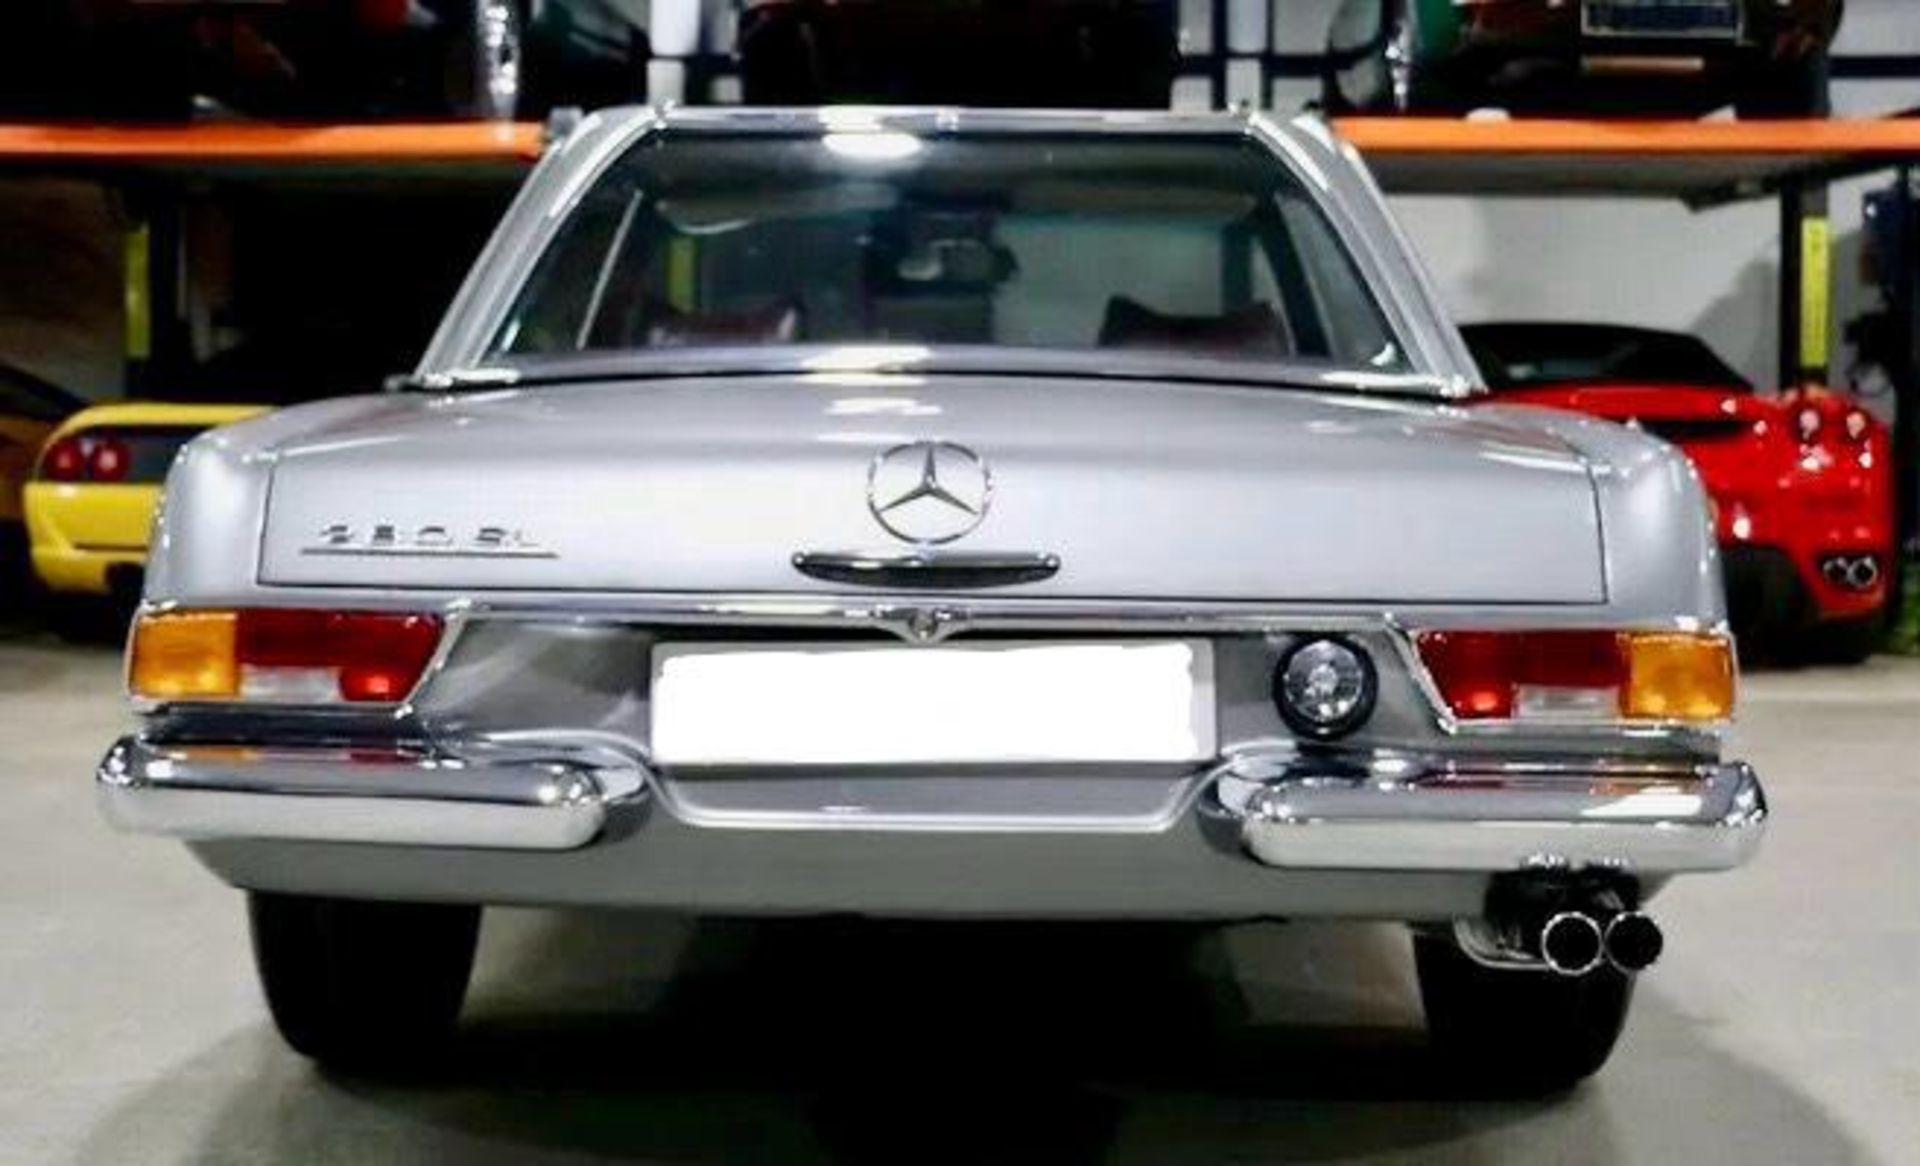 1969 MERCEDES-BENZ 280 SL, LHD MADE IN GERMANY, REGISTERED AND RESTORED IN DUBAI, CAR NOW IN THE UK - Image 5 of 15